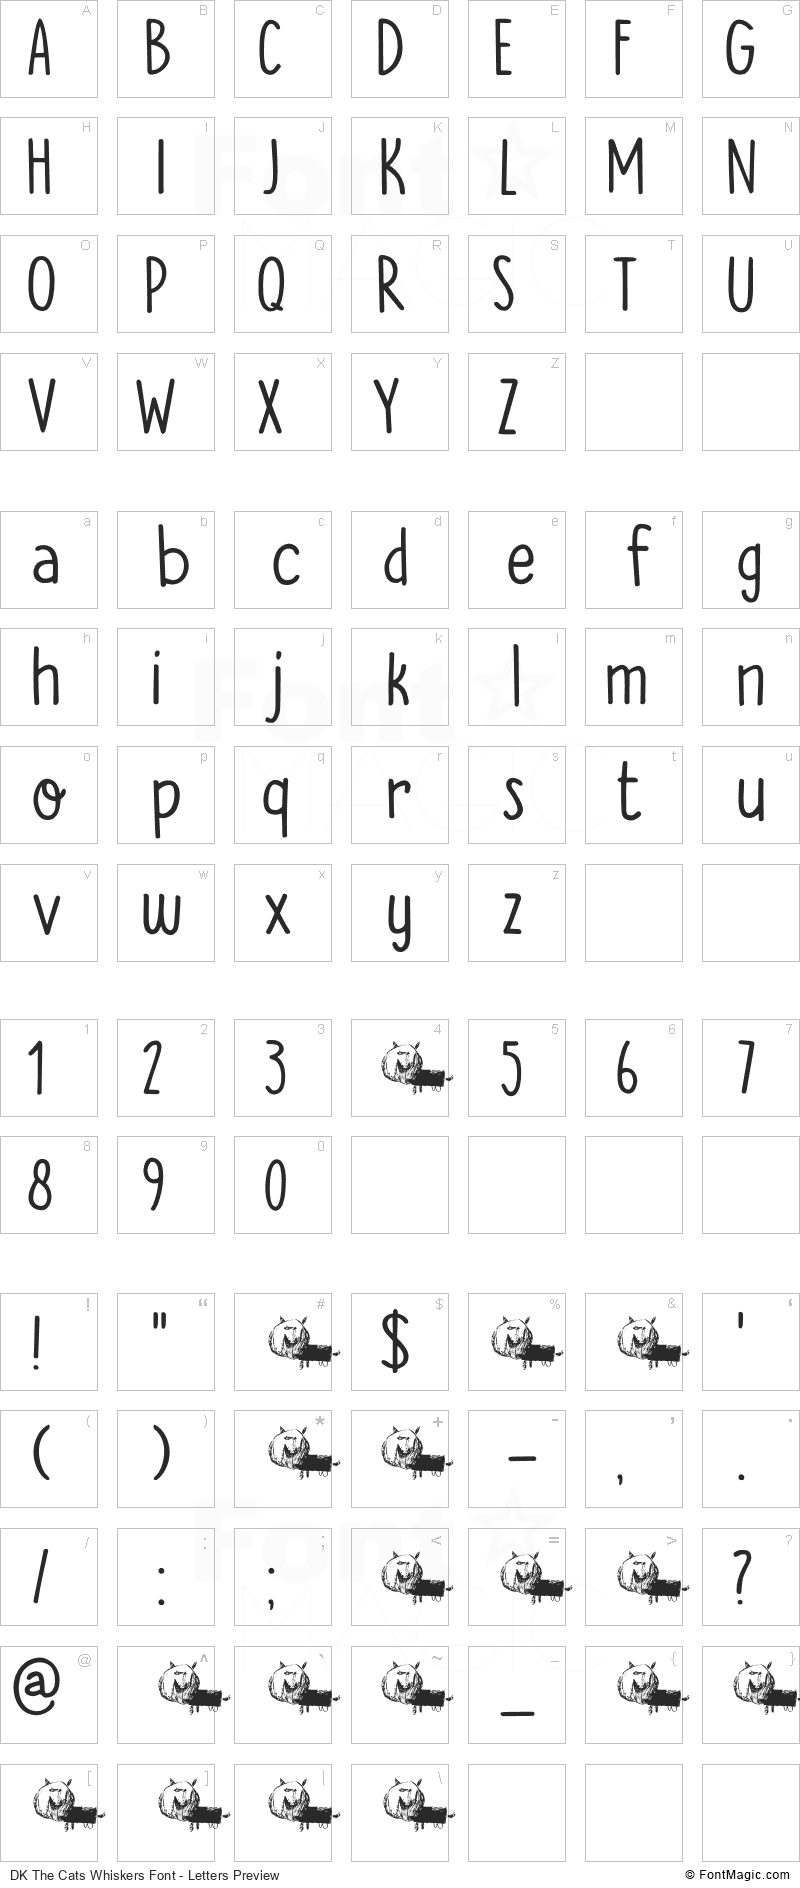 DK The Cats Whiskers Font - All Latters Preview Chart